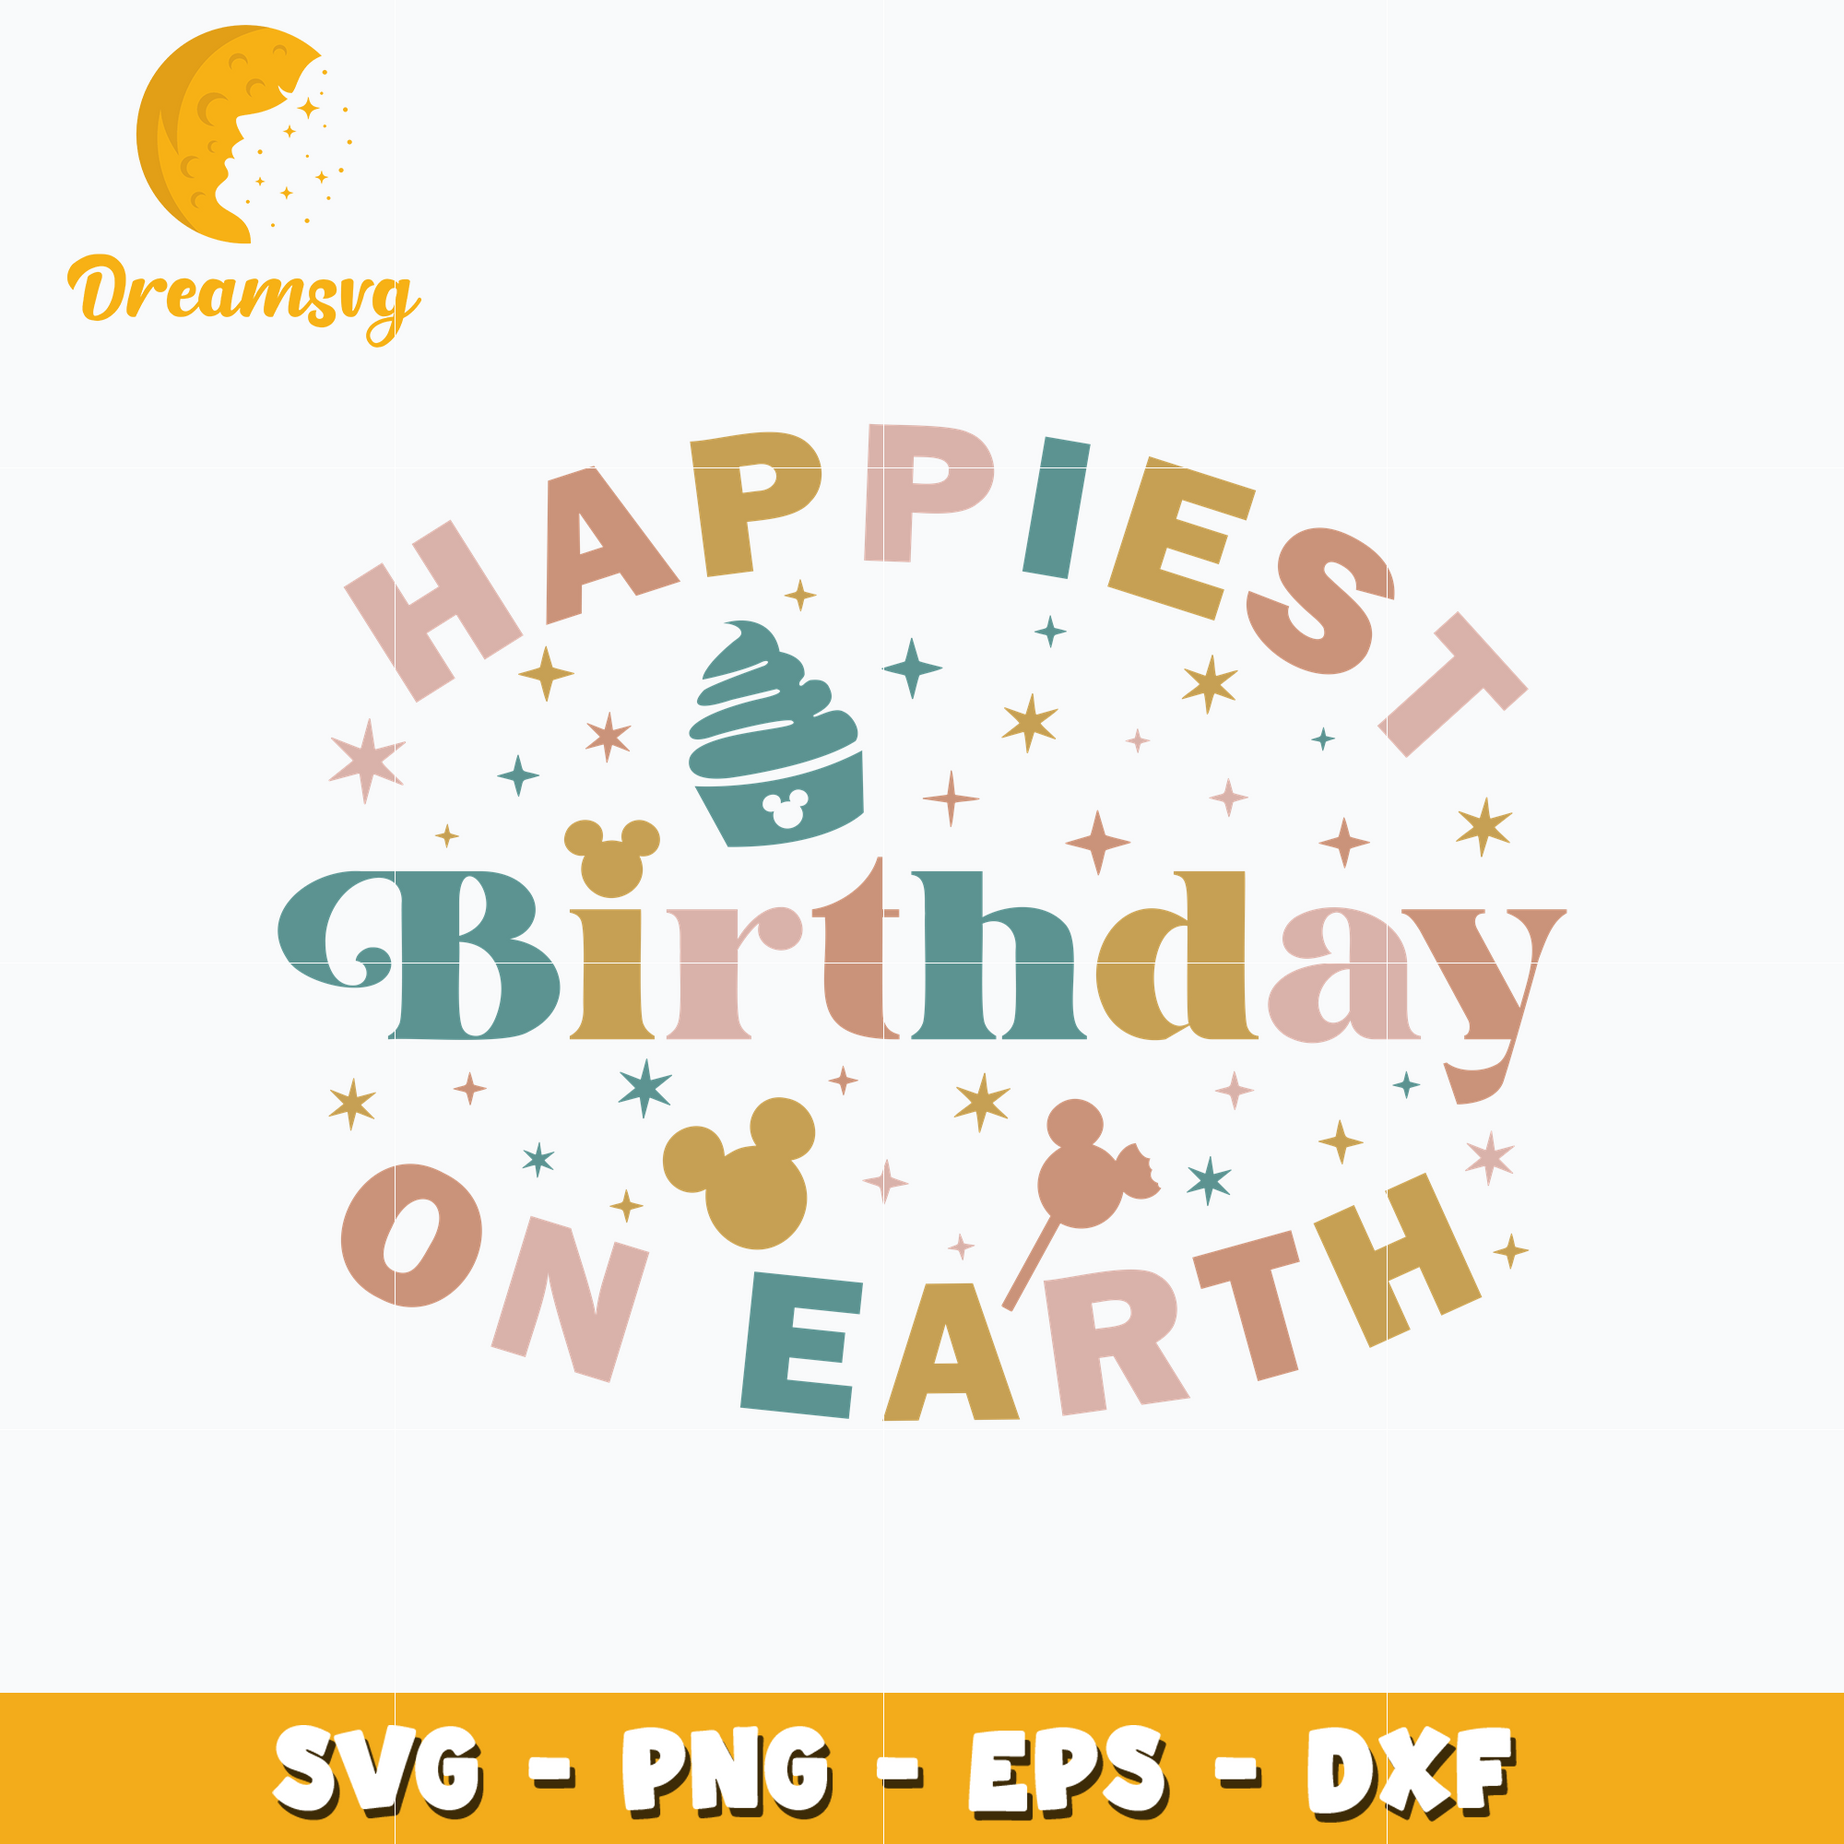 Mickey mouse happiest birthday on earth svg